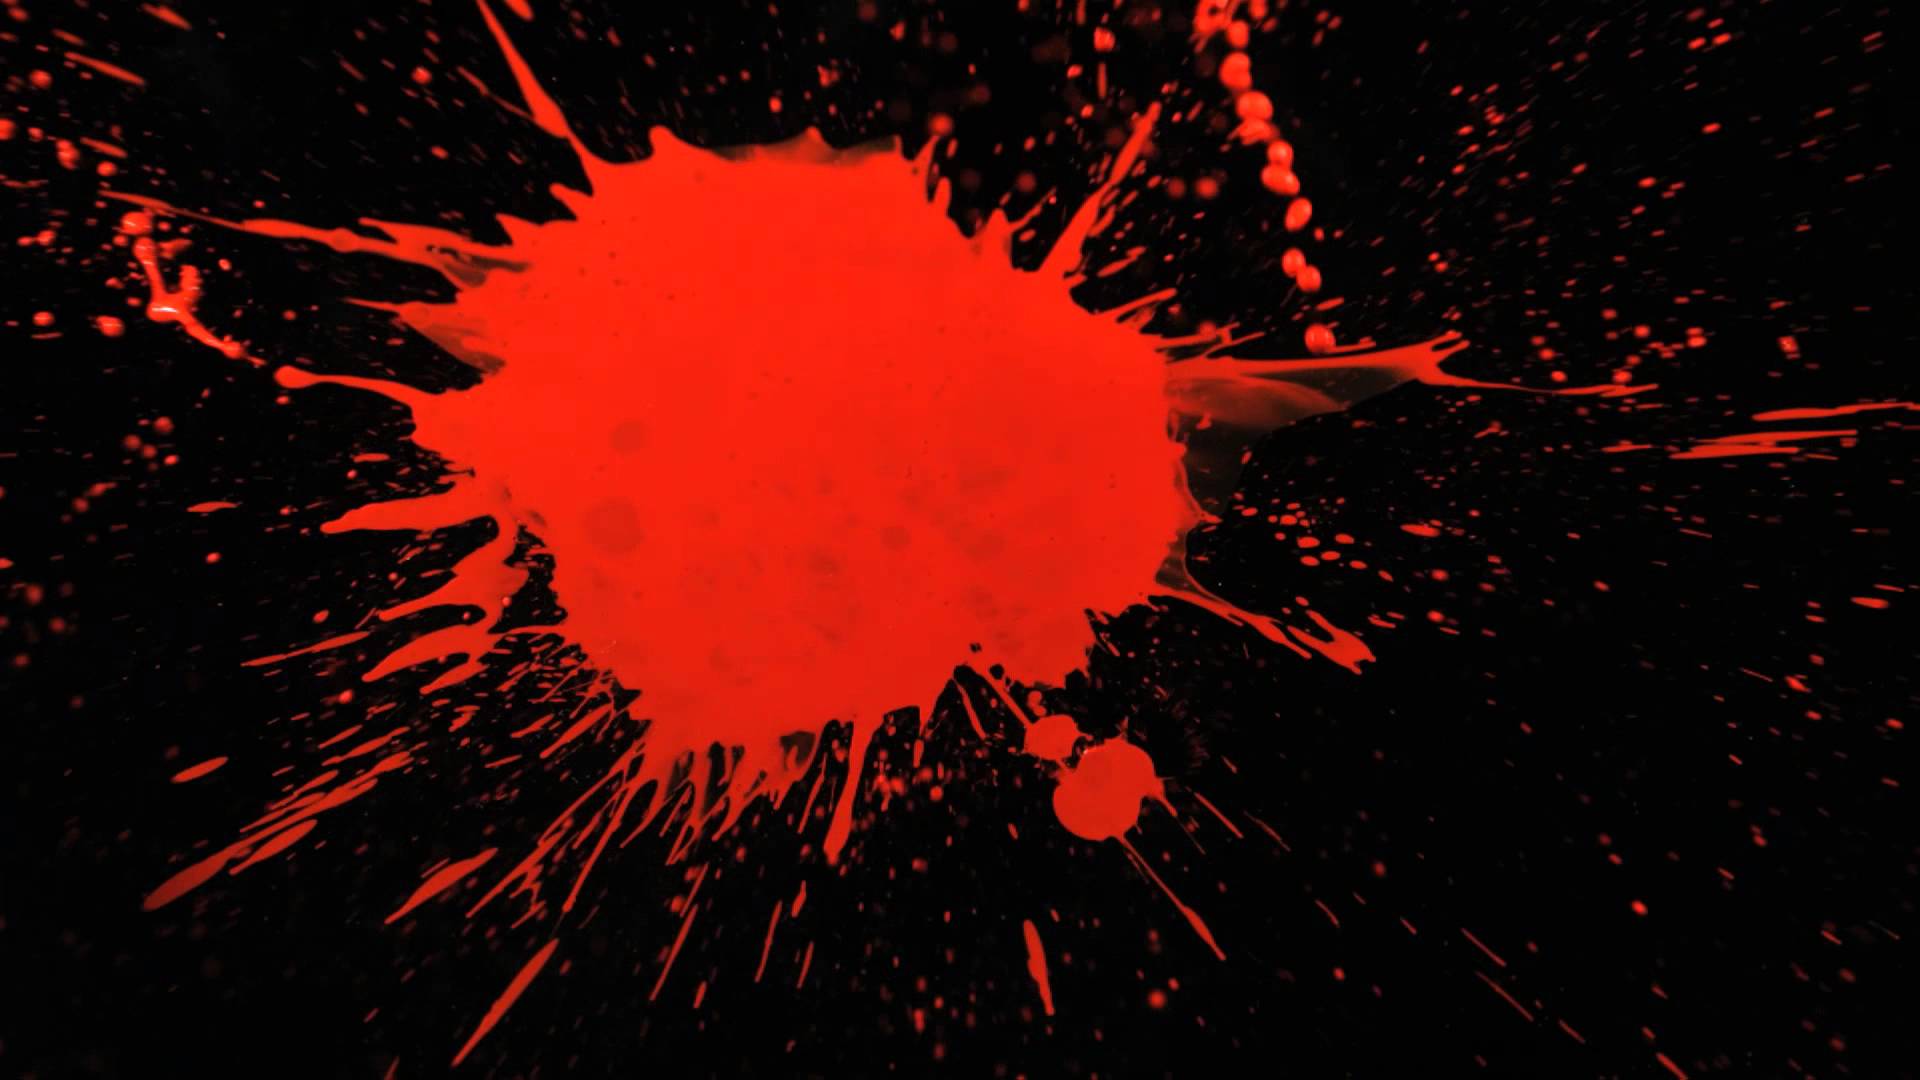 Slow Motion Paint Splatter with Red Paint Splattering a Black ...